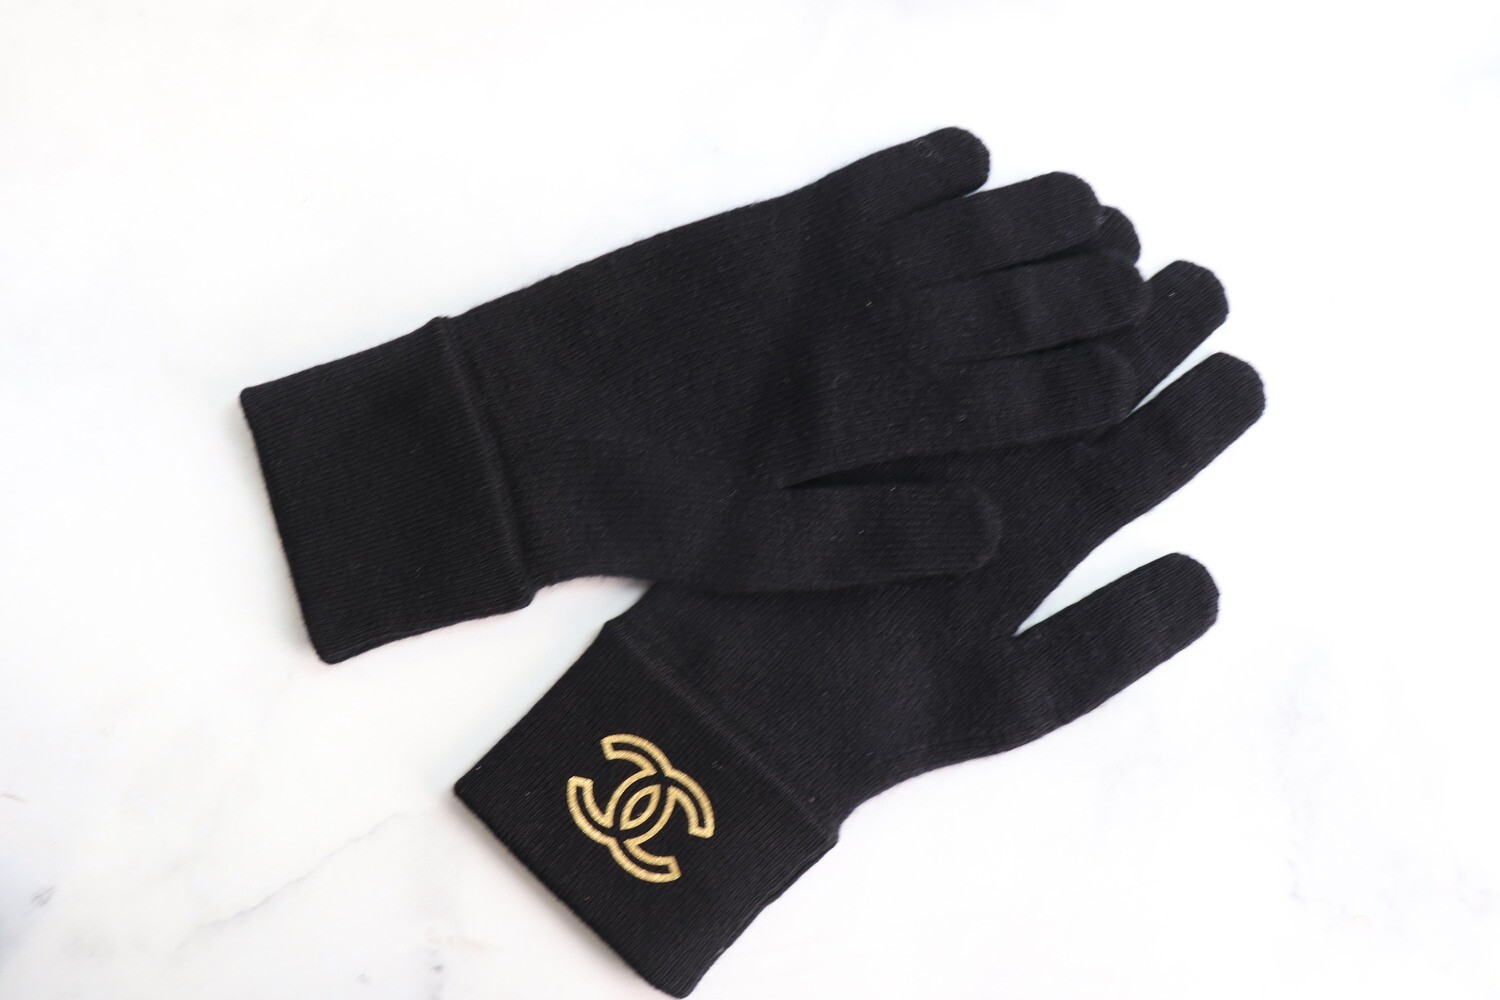 Chanel Gloves, Black with Gold, New